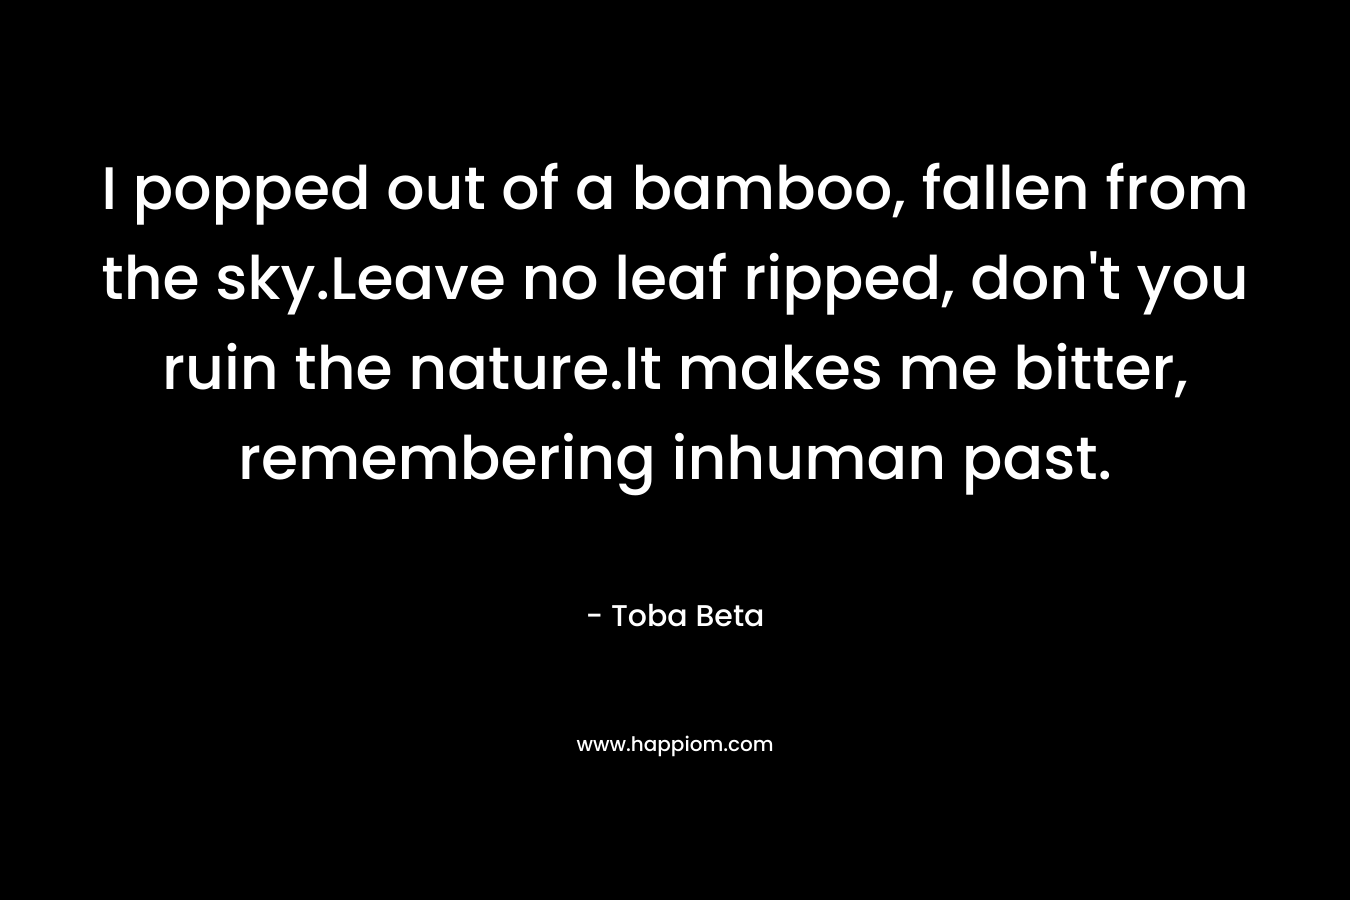 I popped out of a bamboo, fallen from the sky.Leave no leaf ripped, don’t you ruin the nature.It makes me bitter, remembering inhuman past. – Toba Beta